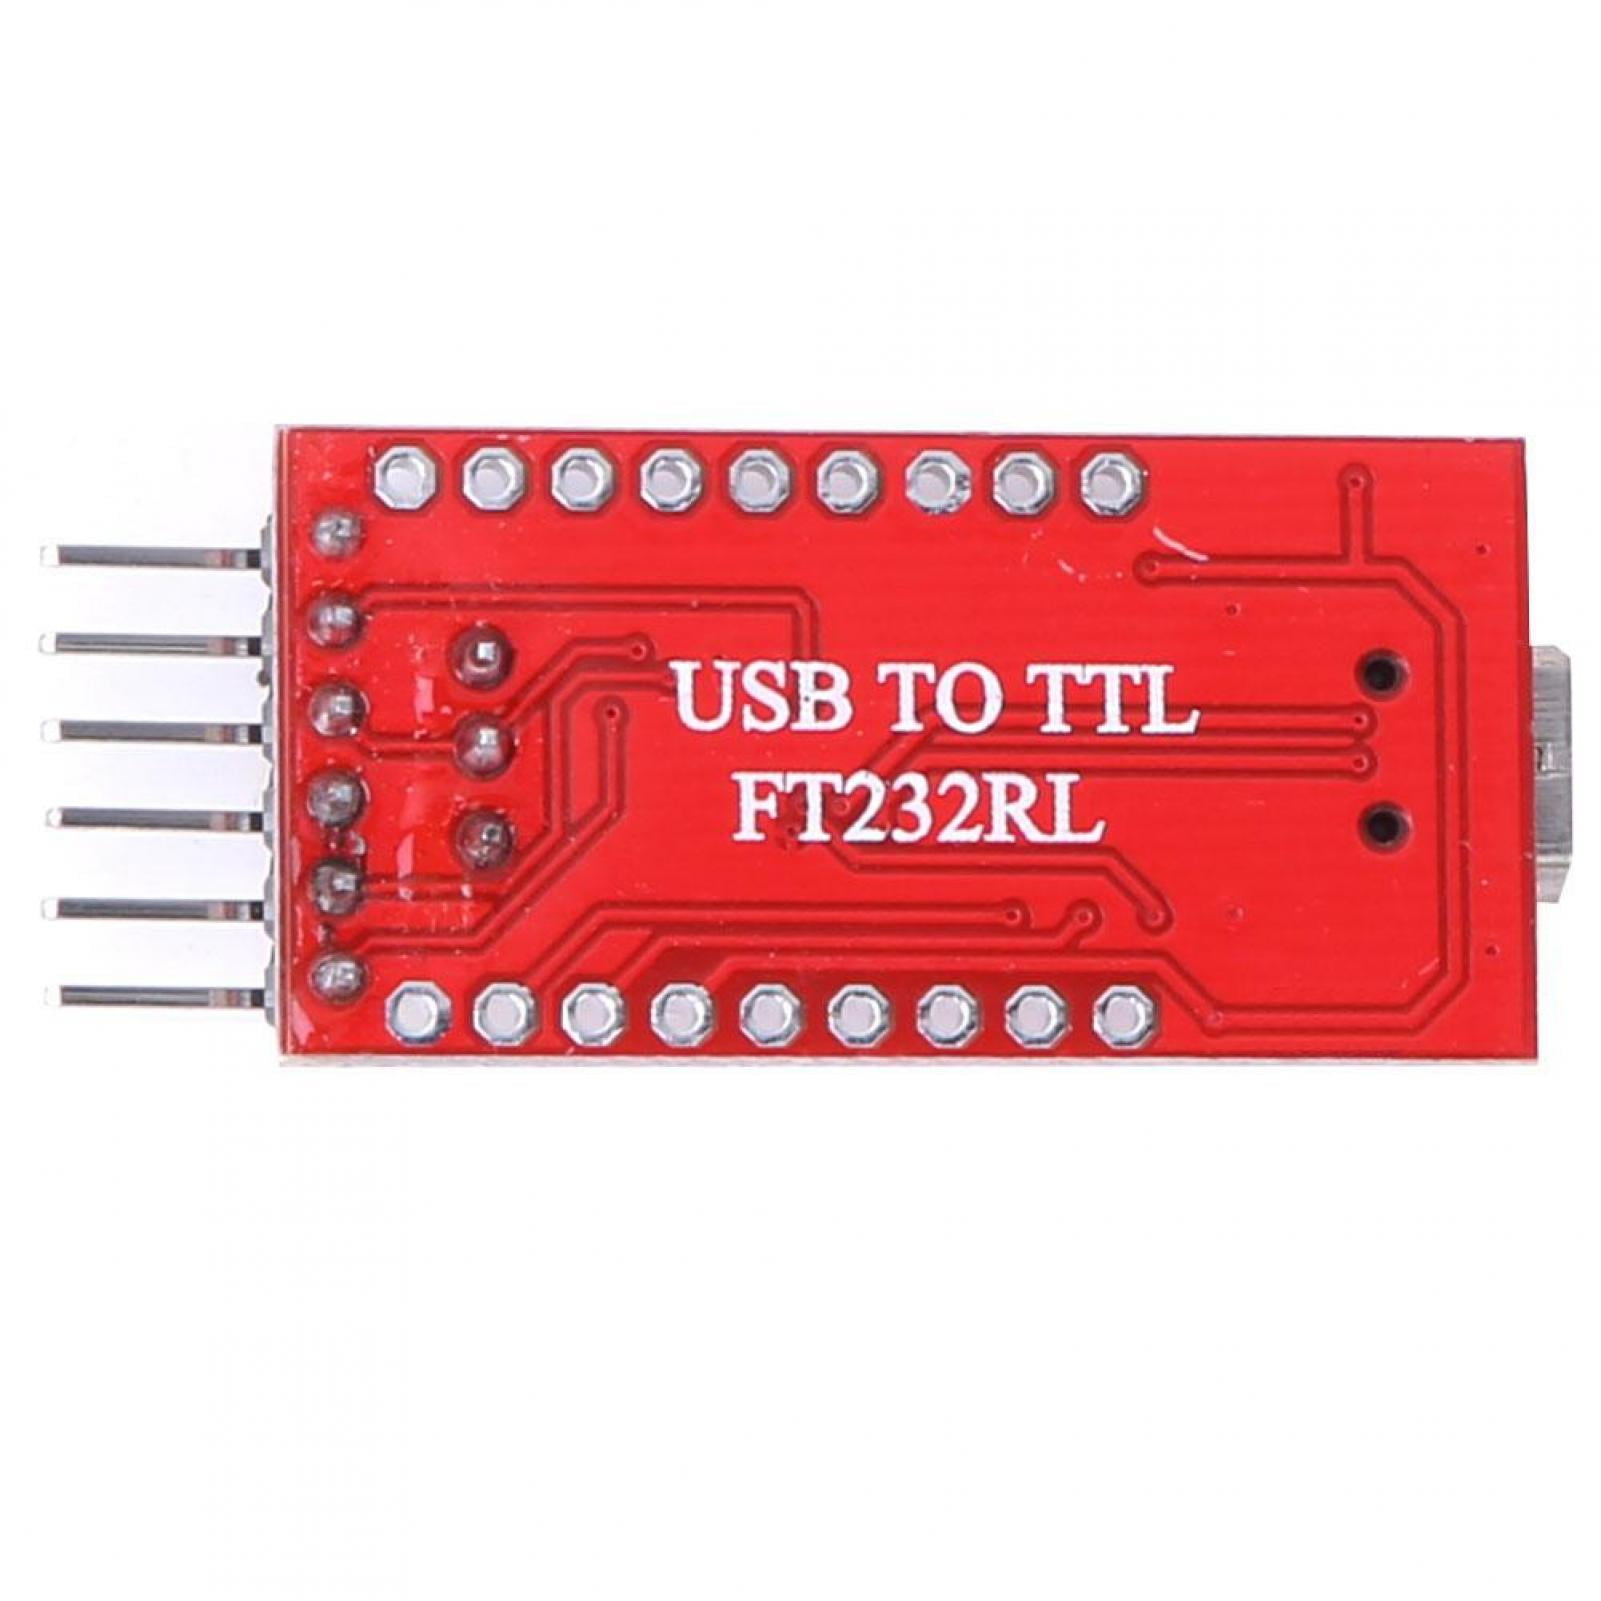 Details about   FTDI FT232RL USB to TTL Serial Converter Adapter Module 5V 3.3V For Arduino